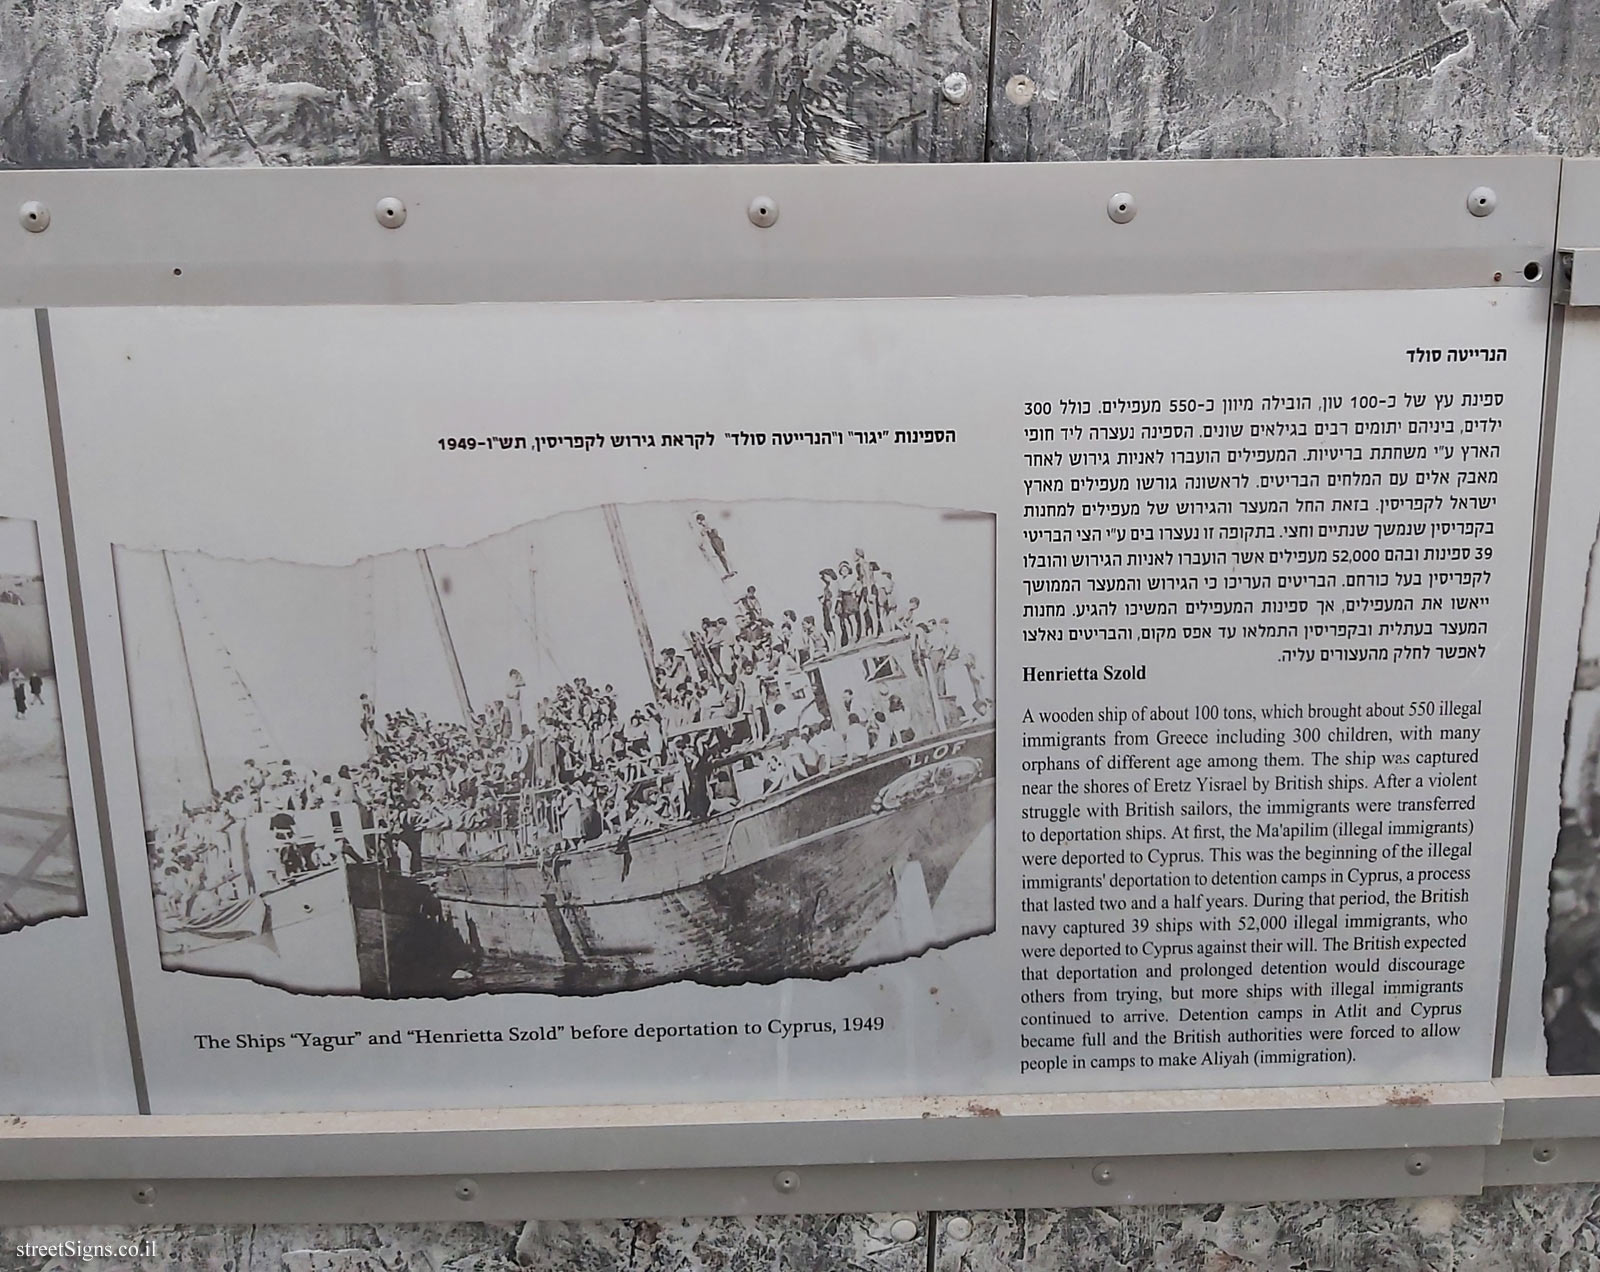 Tel Aviv - London Garden - The story of the illegal immigration - The ship "Henrietta Szold"